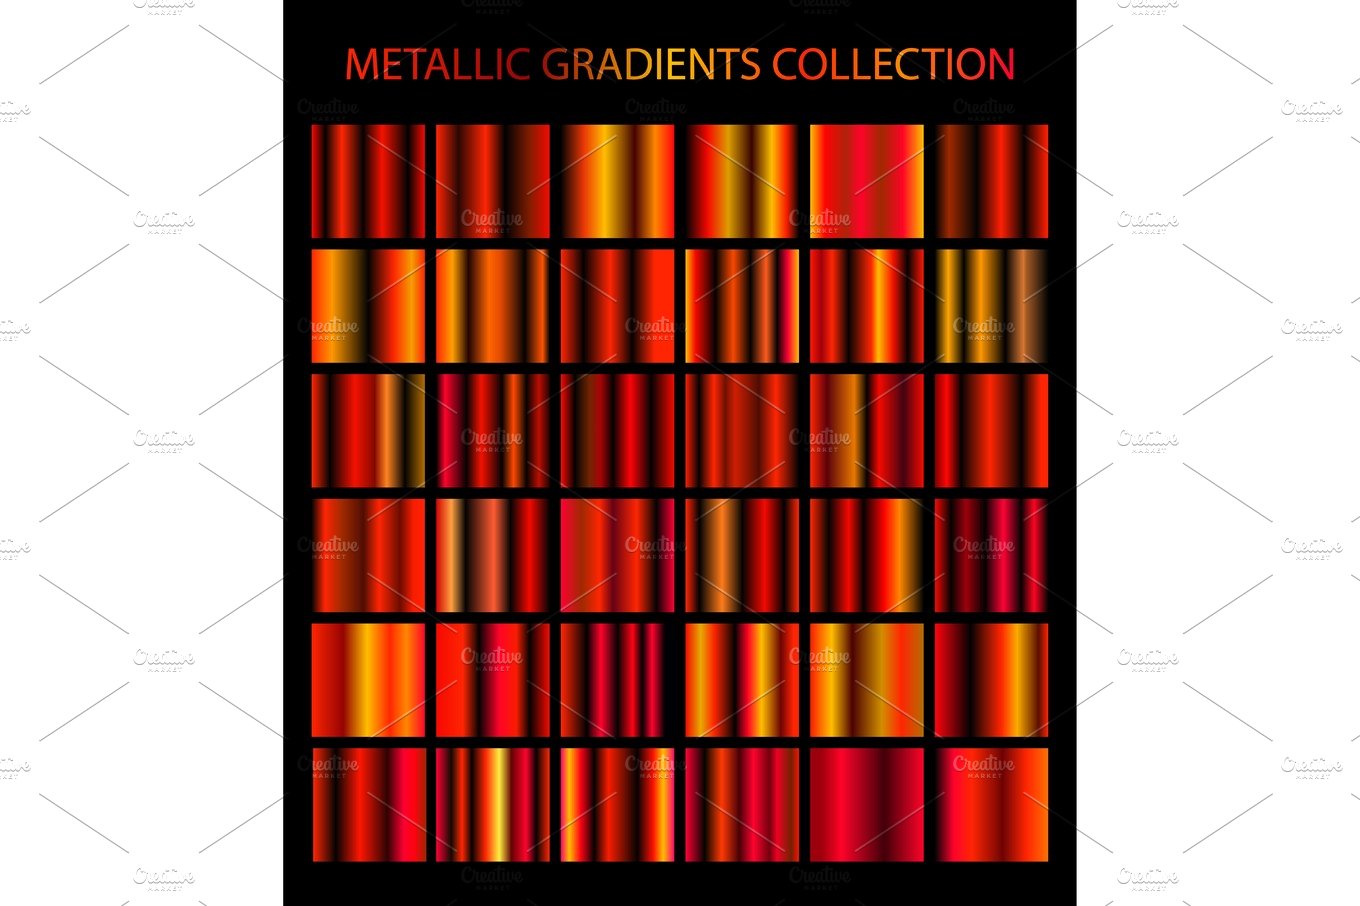 Metallic gradients collection 2 cover image.